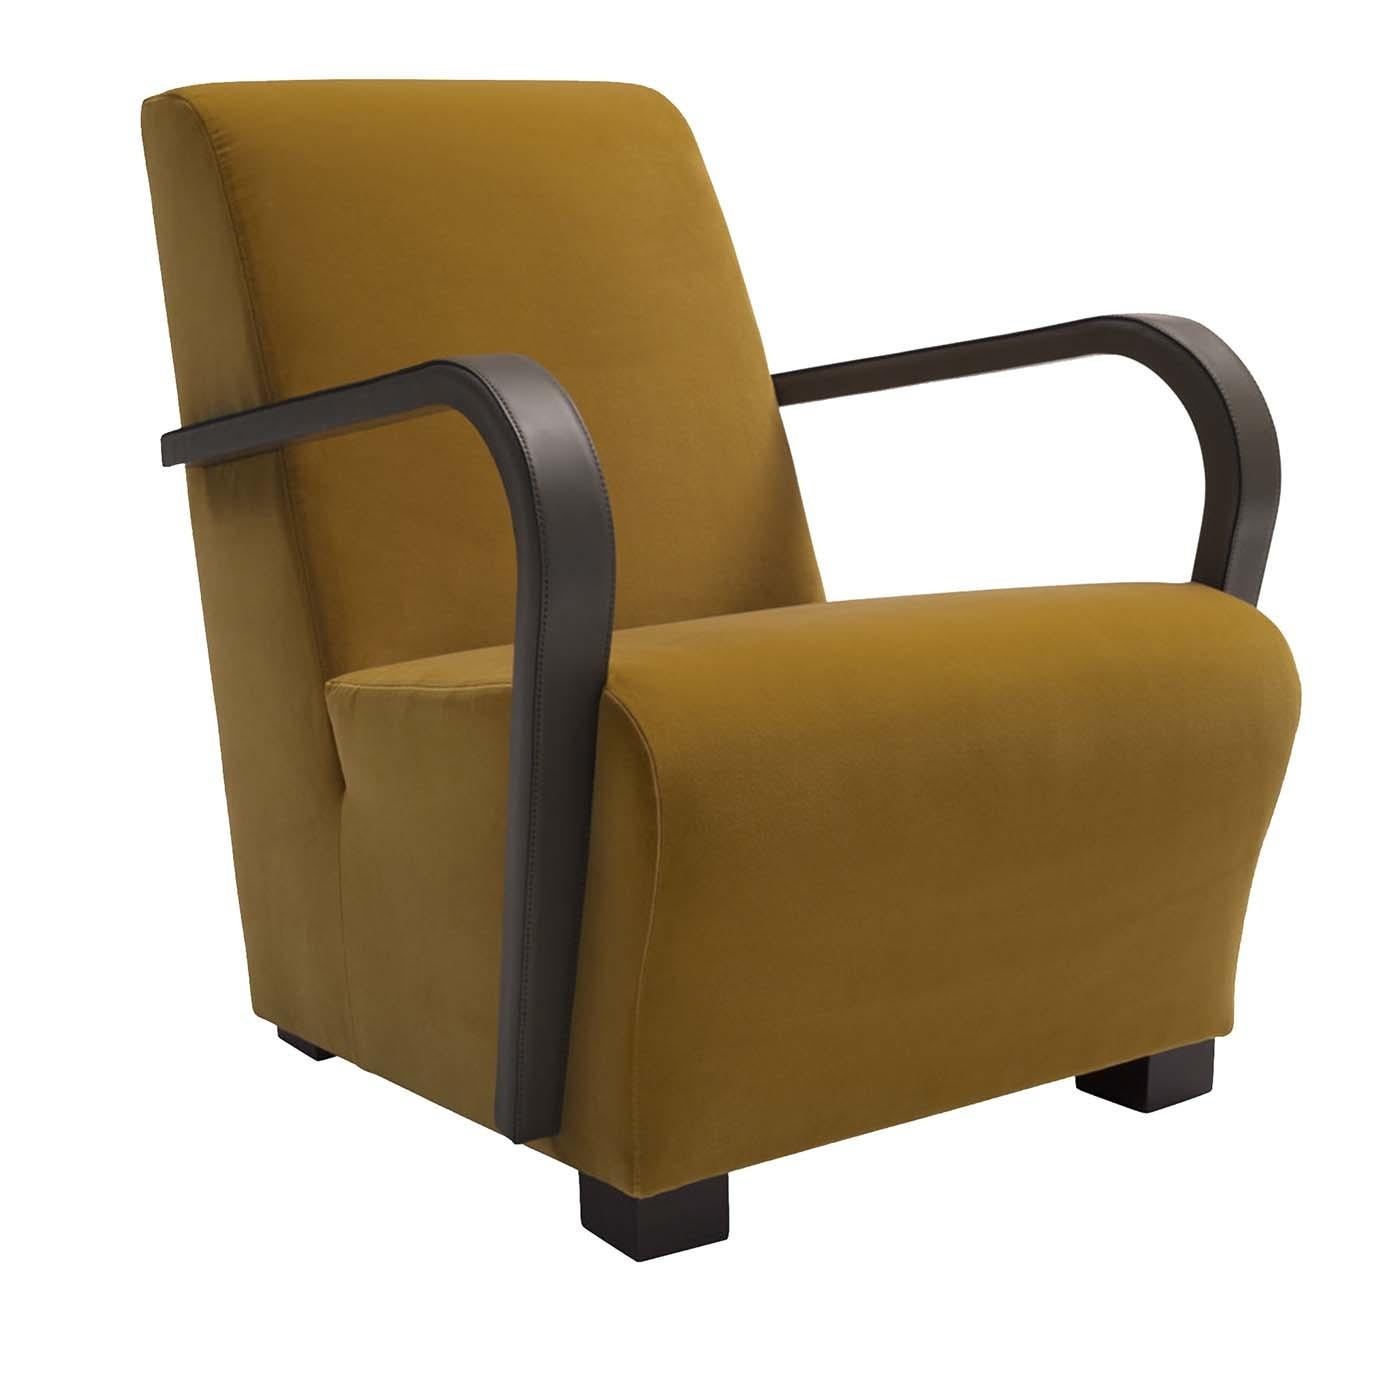 Part of the Merylin collection, this armchair boasts plush seat and backrest and a stunning pair of armrests that create a sinuous contrasts with the full volumes of the rest of the chair, while also adding a light touch to it. Reminiscent of the